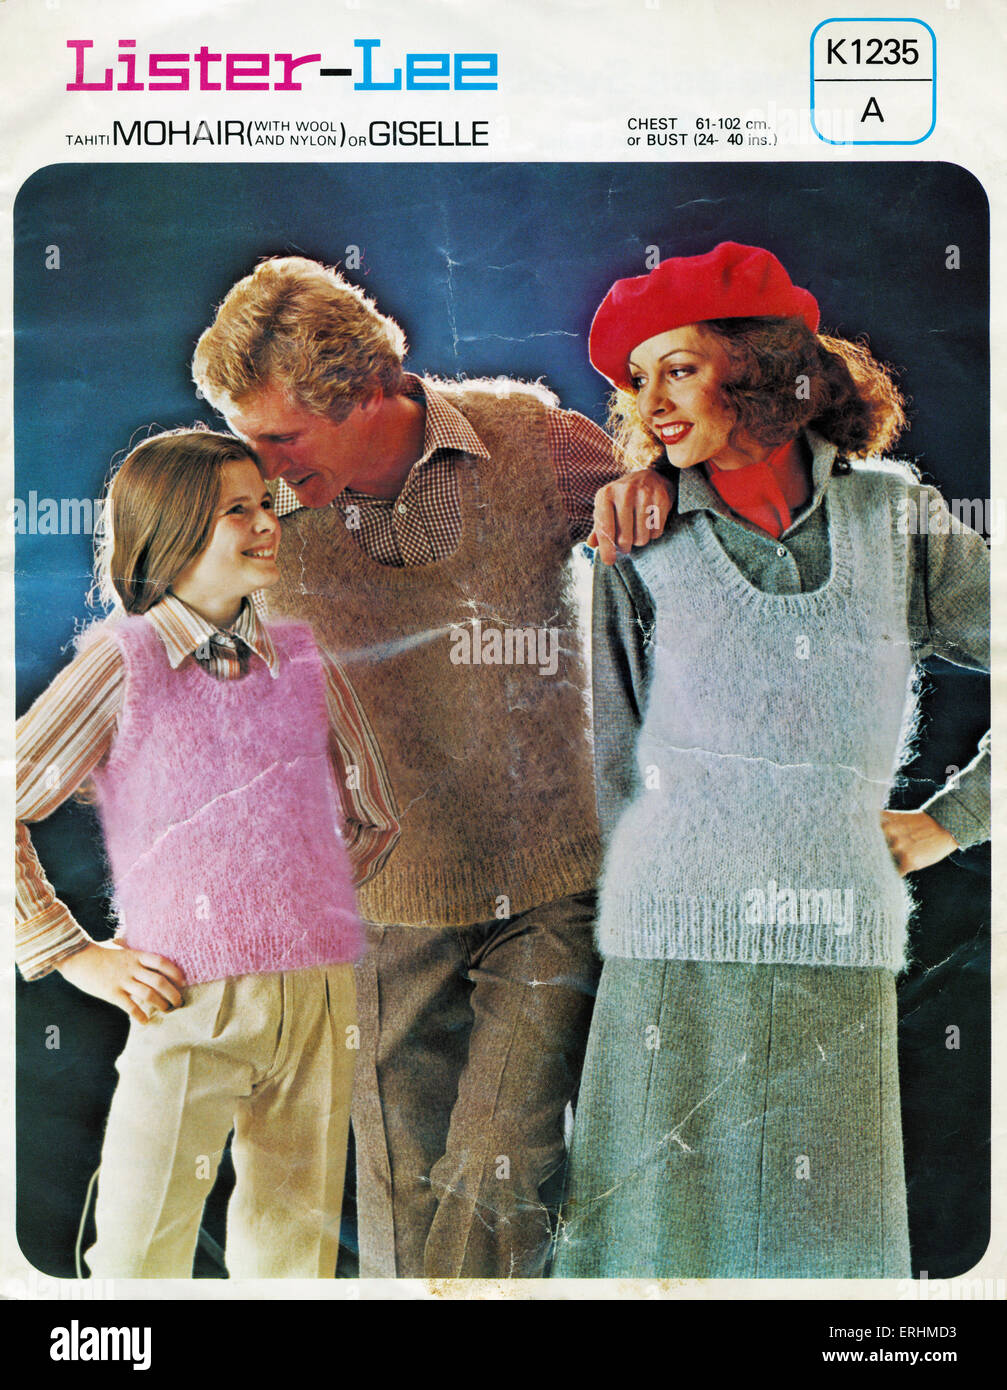 'Sleeveless Sweaters for the Family' - mother, father & child wearing mohair pullovers. From the cover of a knitting instruction booklet by the company Lister-Lee. Knitting pattern. Smiling. Stock Photo